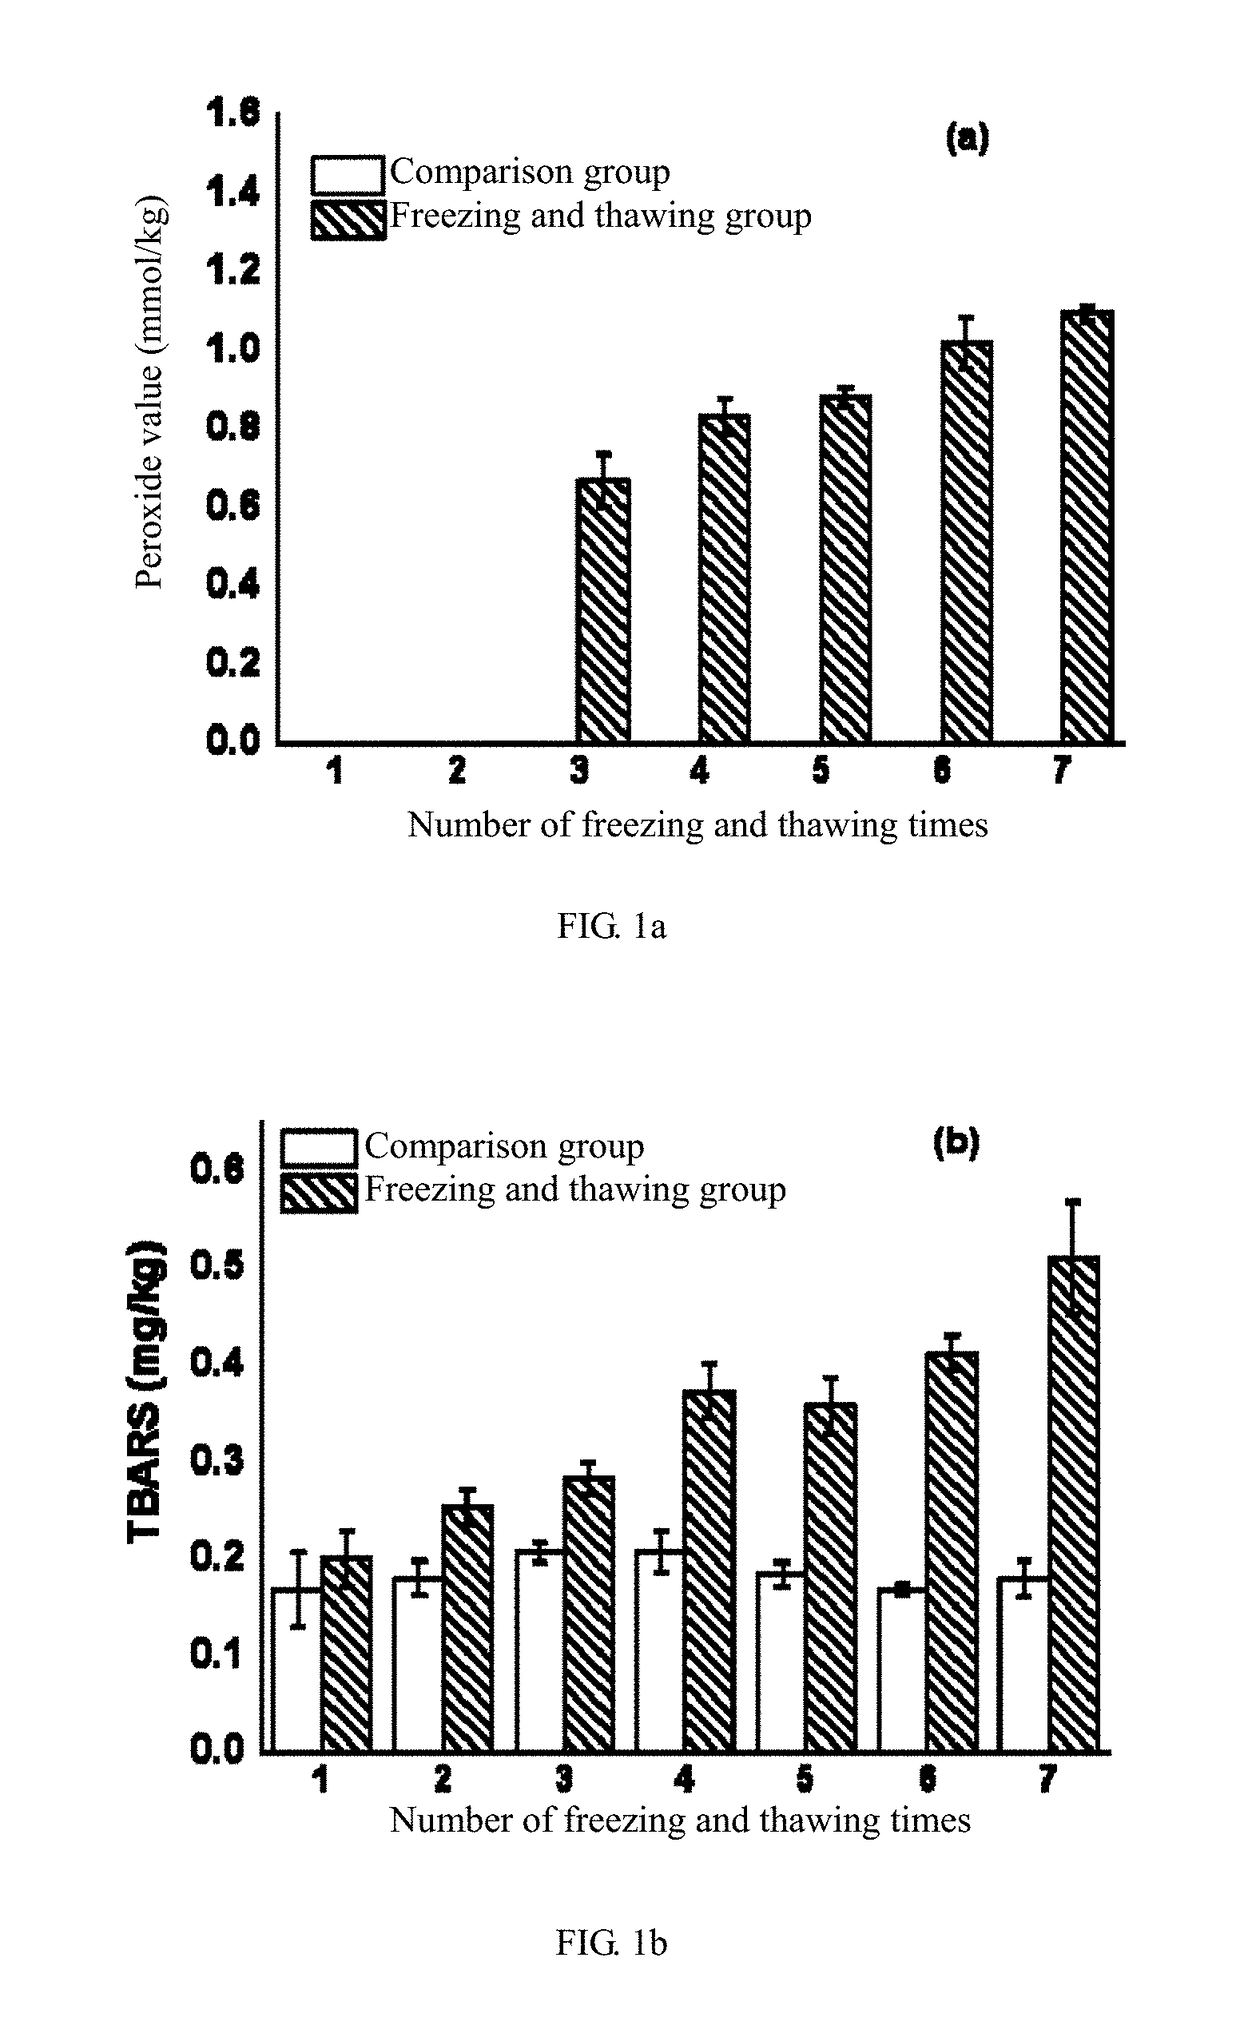 Method for representing quality change process of beef fat during repeated freezing and thawing through Raman spectrum